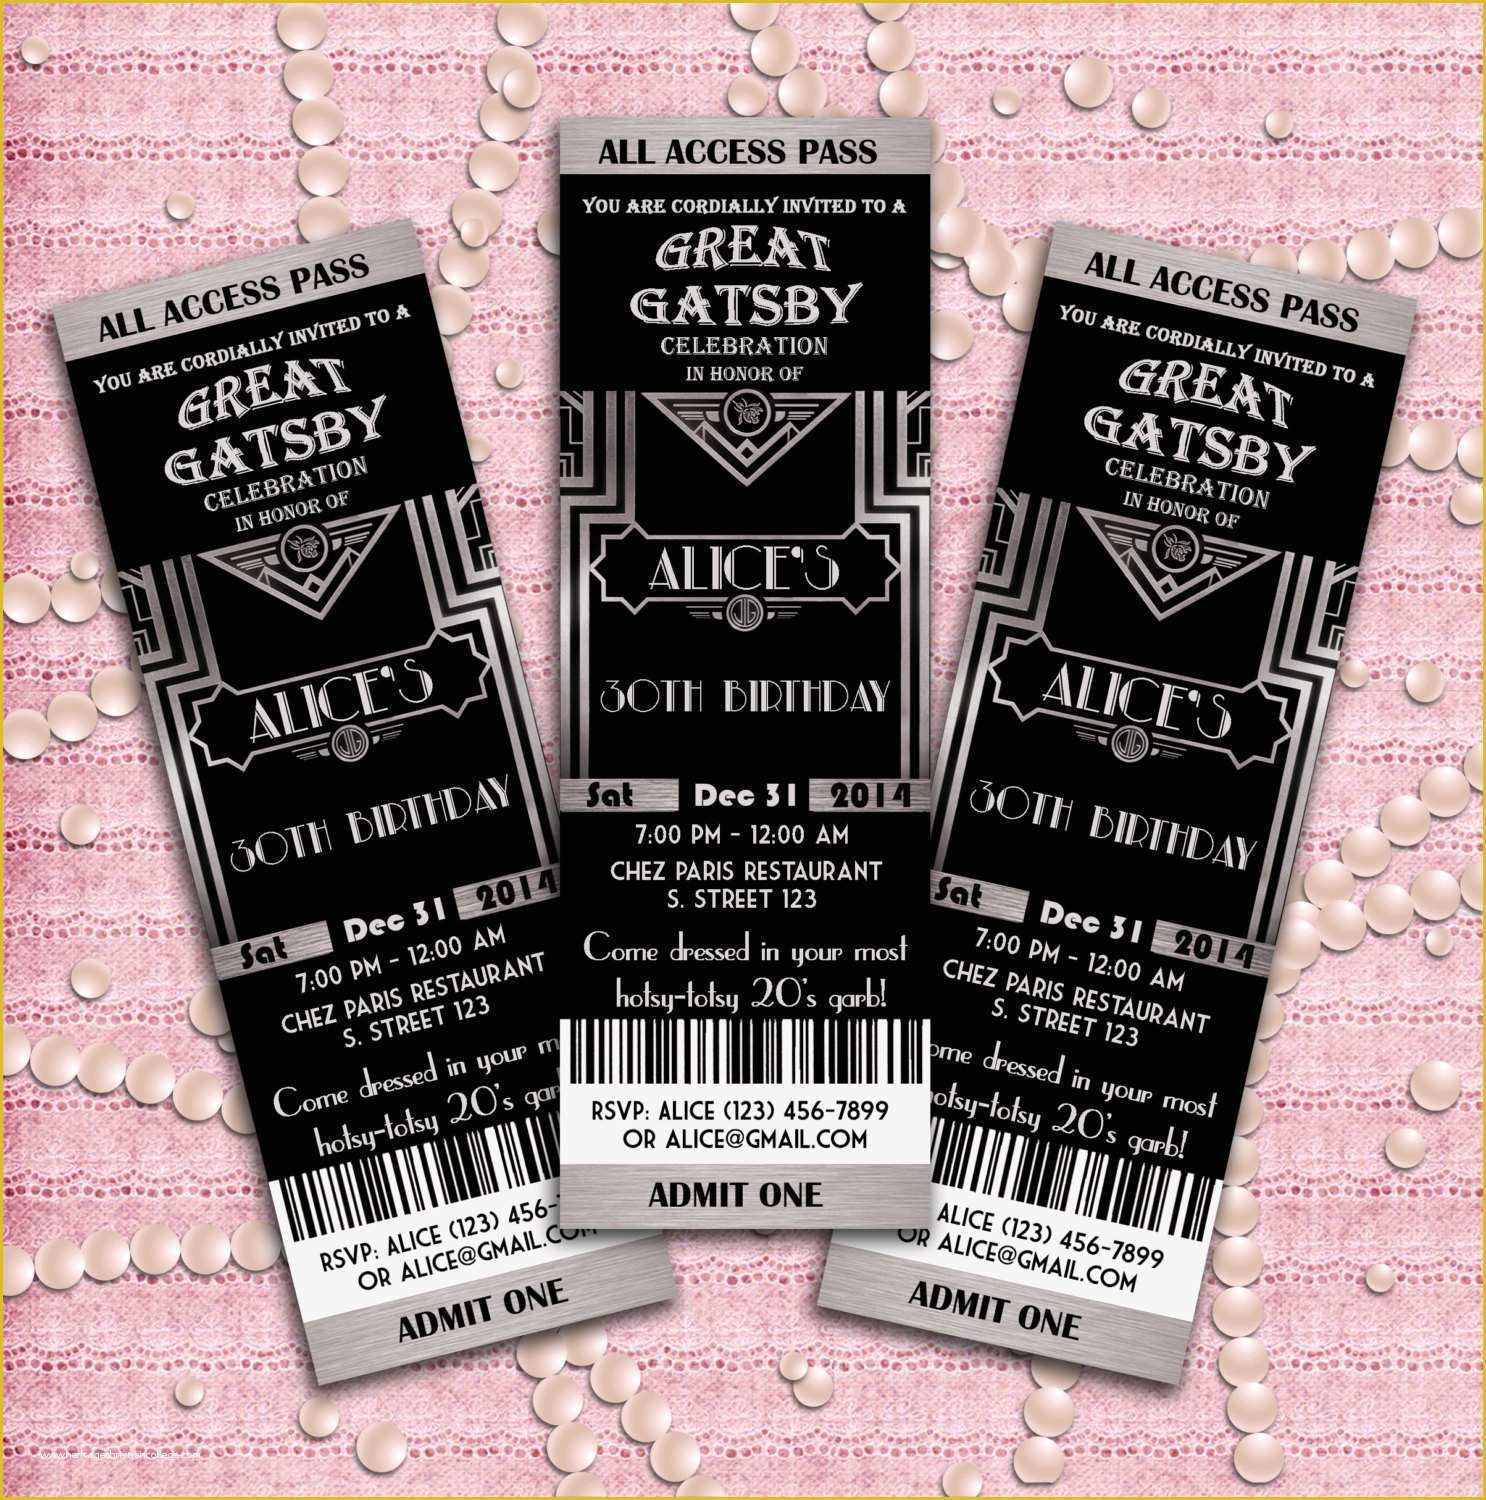 Prom Ticket Template Free Of Great Gatsby Style Art Deco Party Invitation Prom